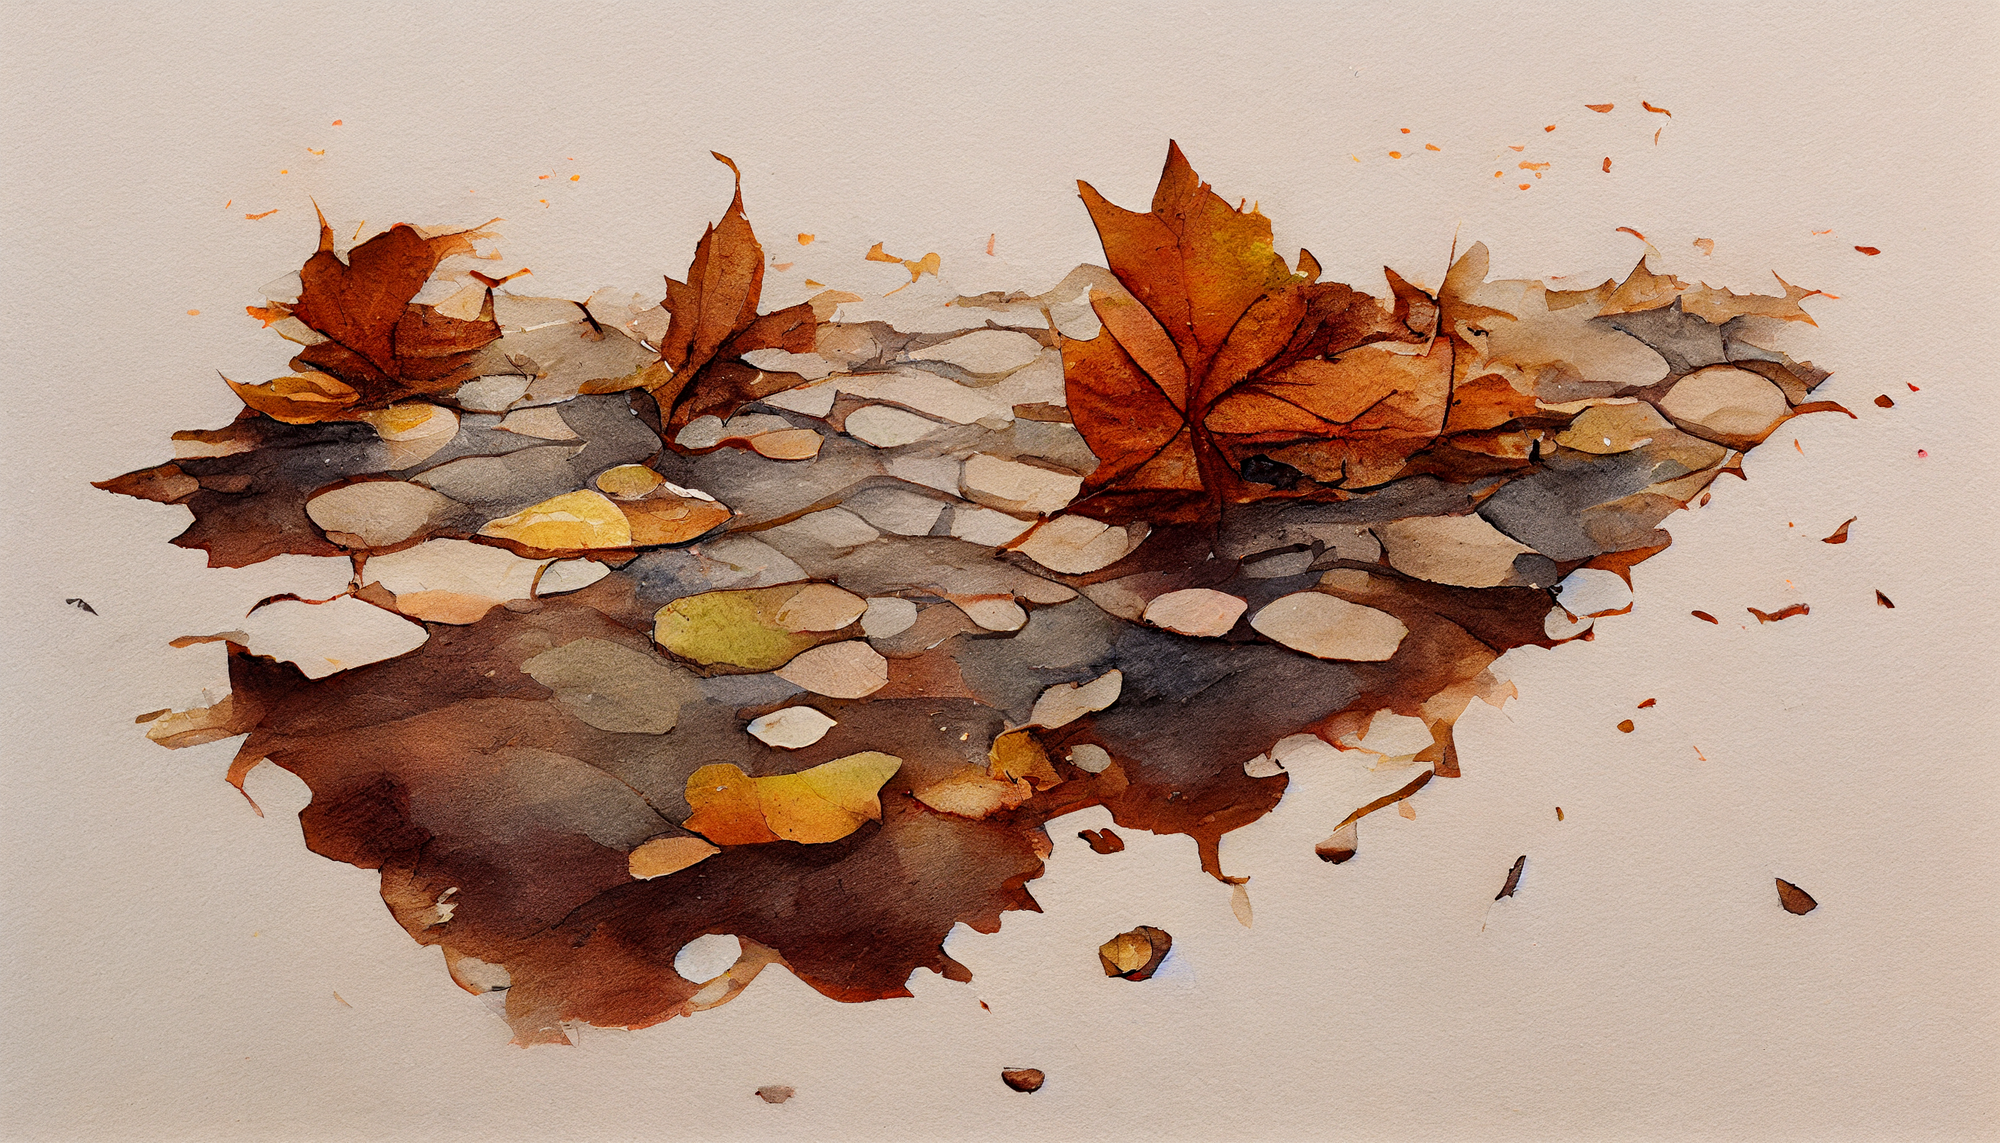 watercolor of sad brown leaves scattered along puddles on a sidewalk